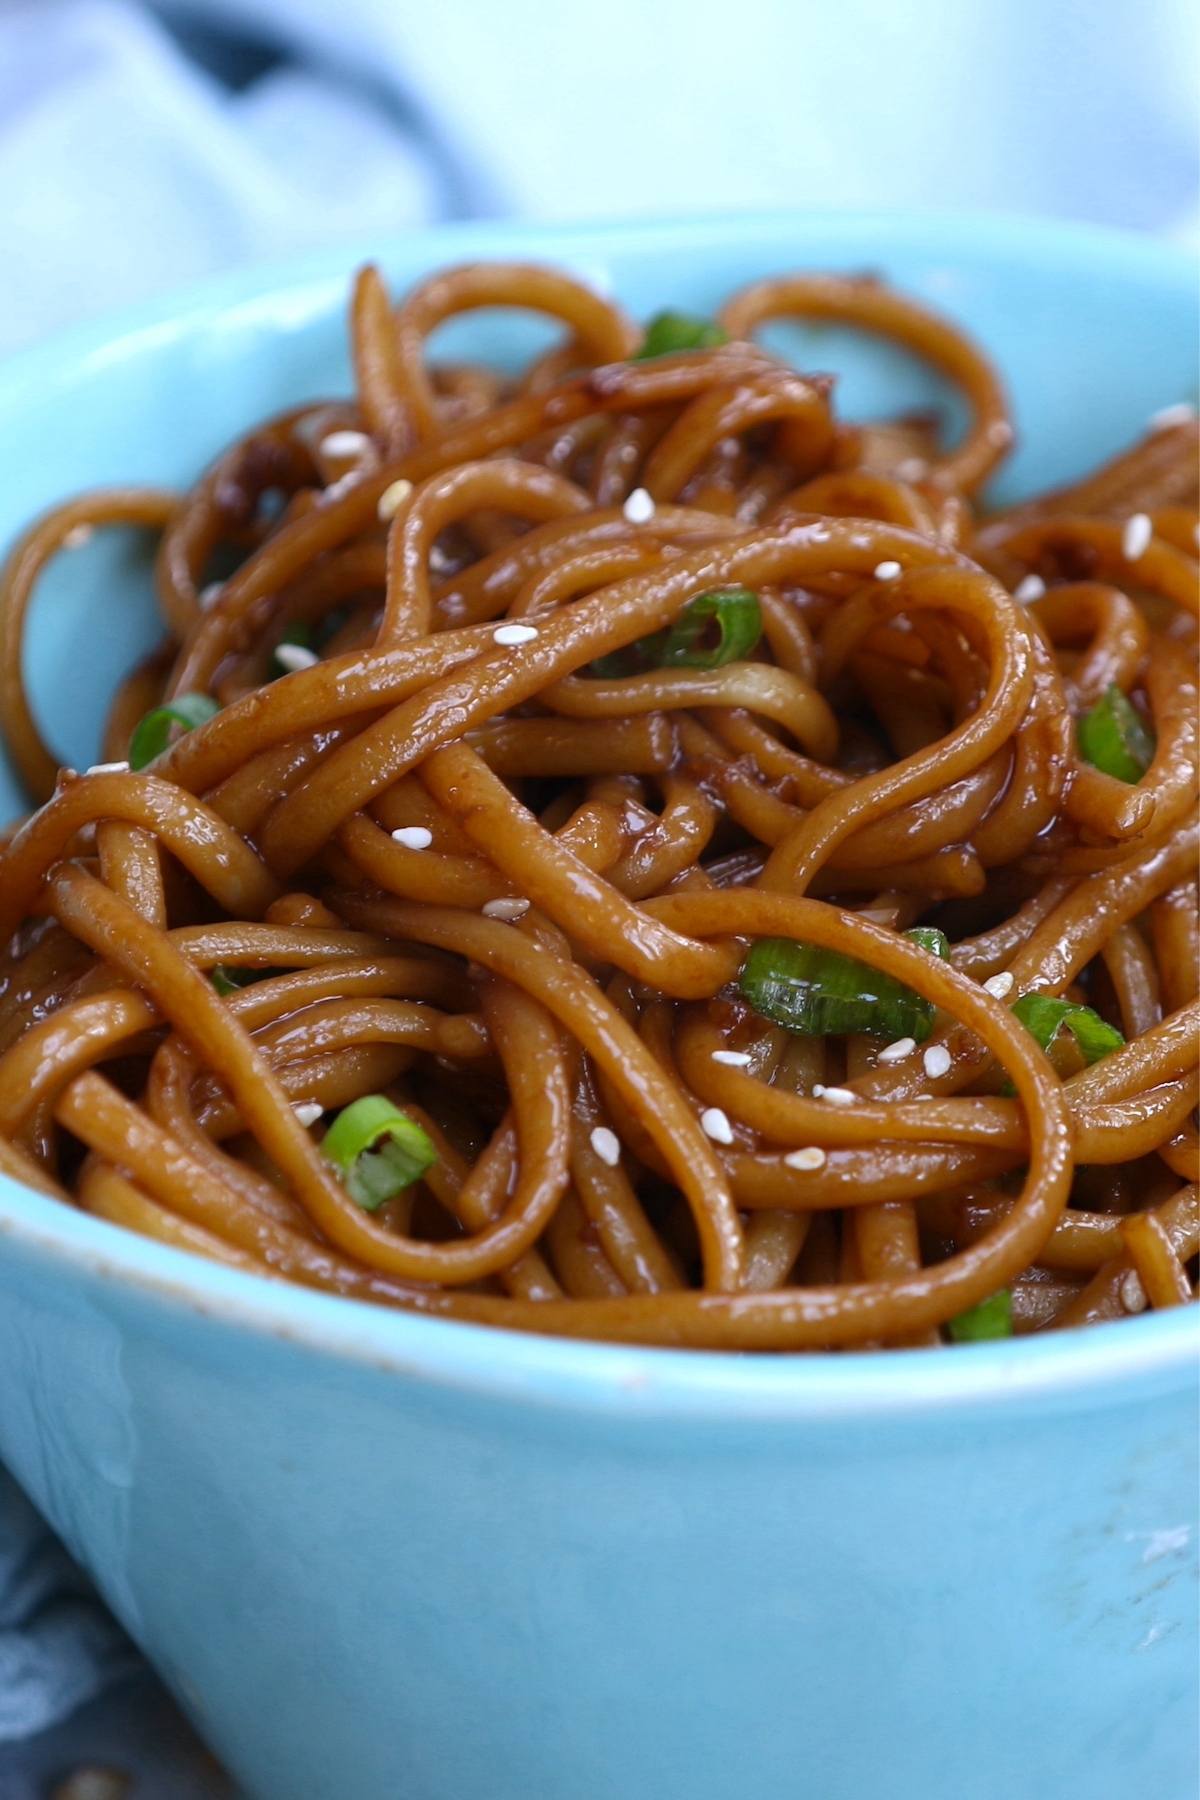 A trip to a hibachi is always a good time. No matter your entree, you can never go wrong with a generous serving of delicious hibachi noodles. This Japanese-inspired dish is made with yakisoba noodles, Teriyaki sauce, brown sugar and sesame oil. Enjoy with shrimp, chicken, steak or plant-based options.